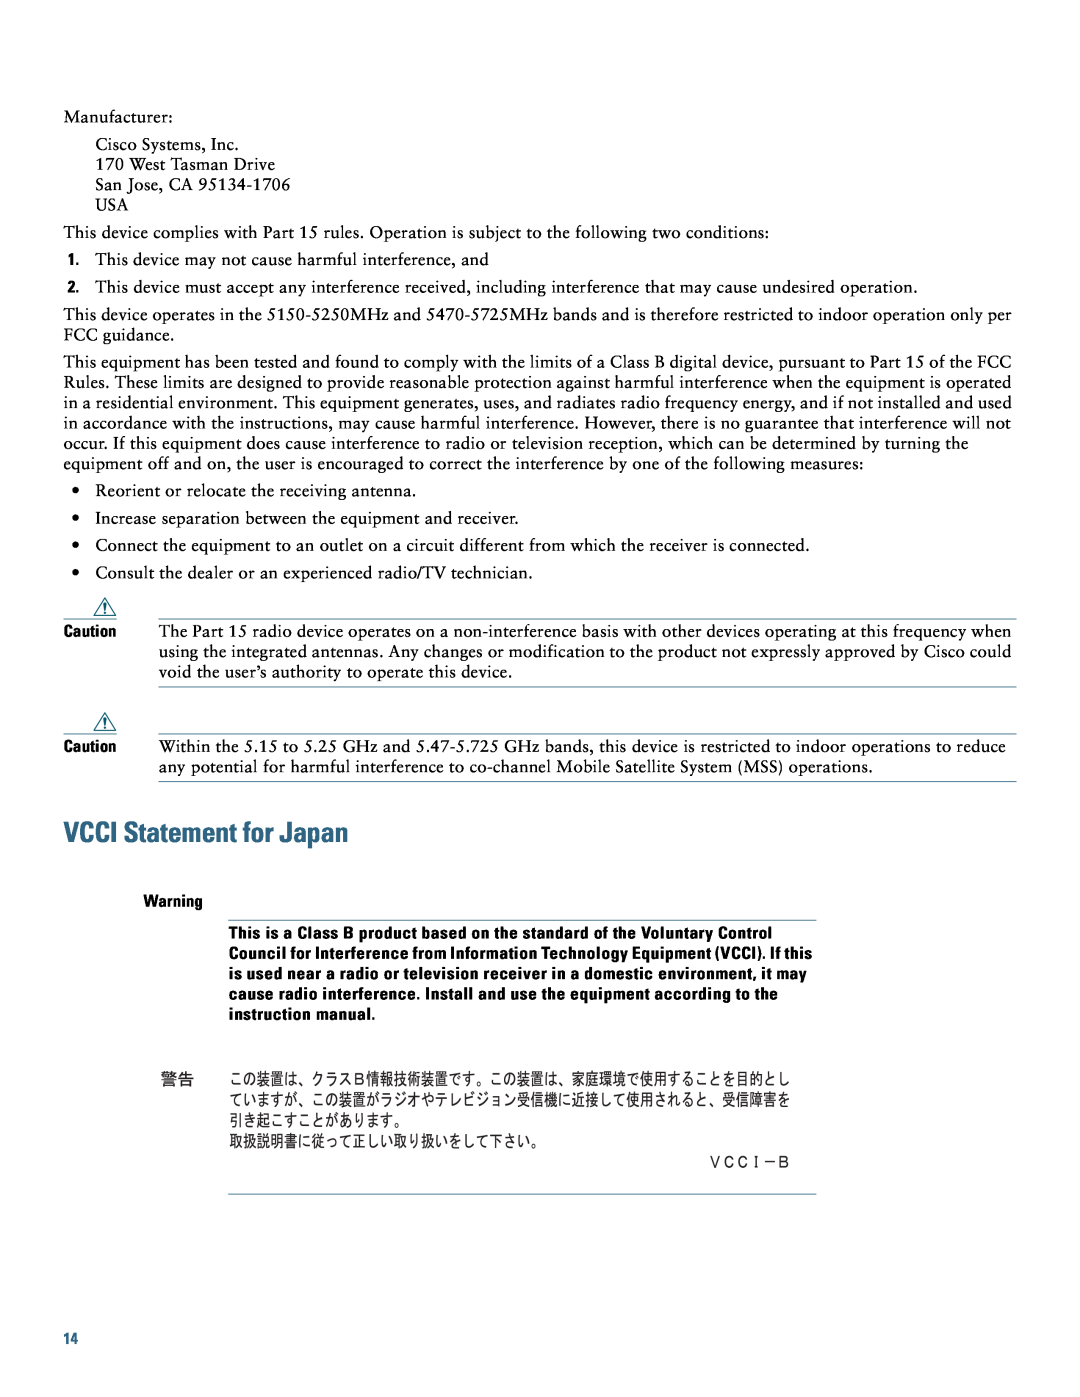 Cisco Systems AIRCAP702IAK9 specifications VCCI Statement for Japan 